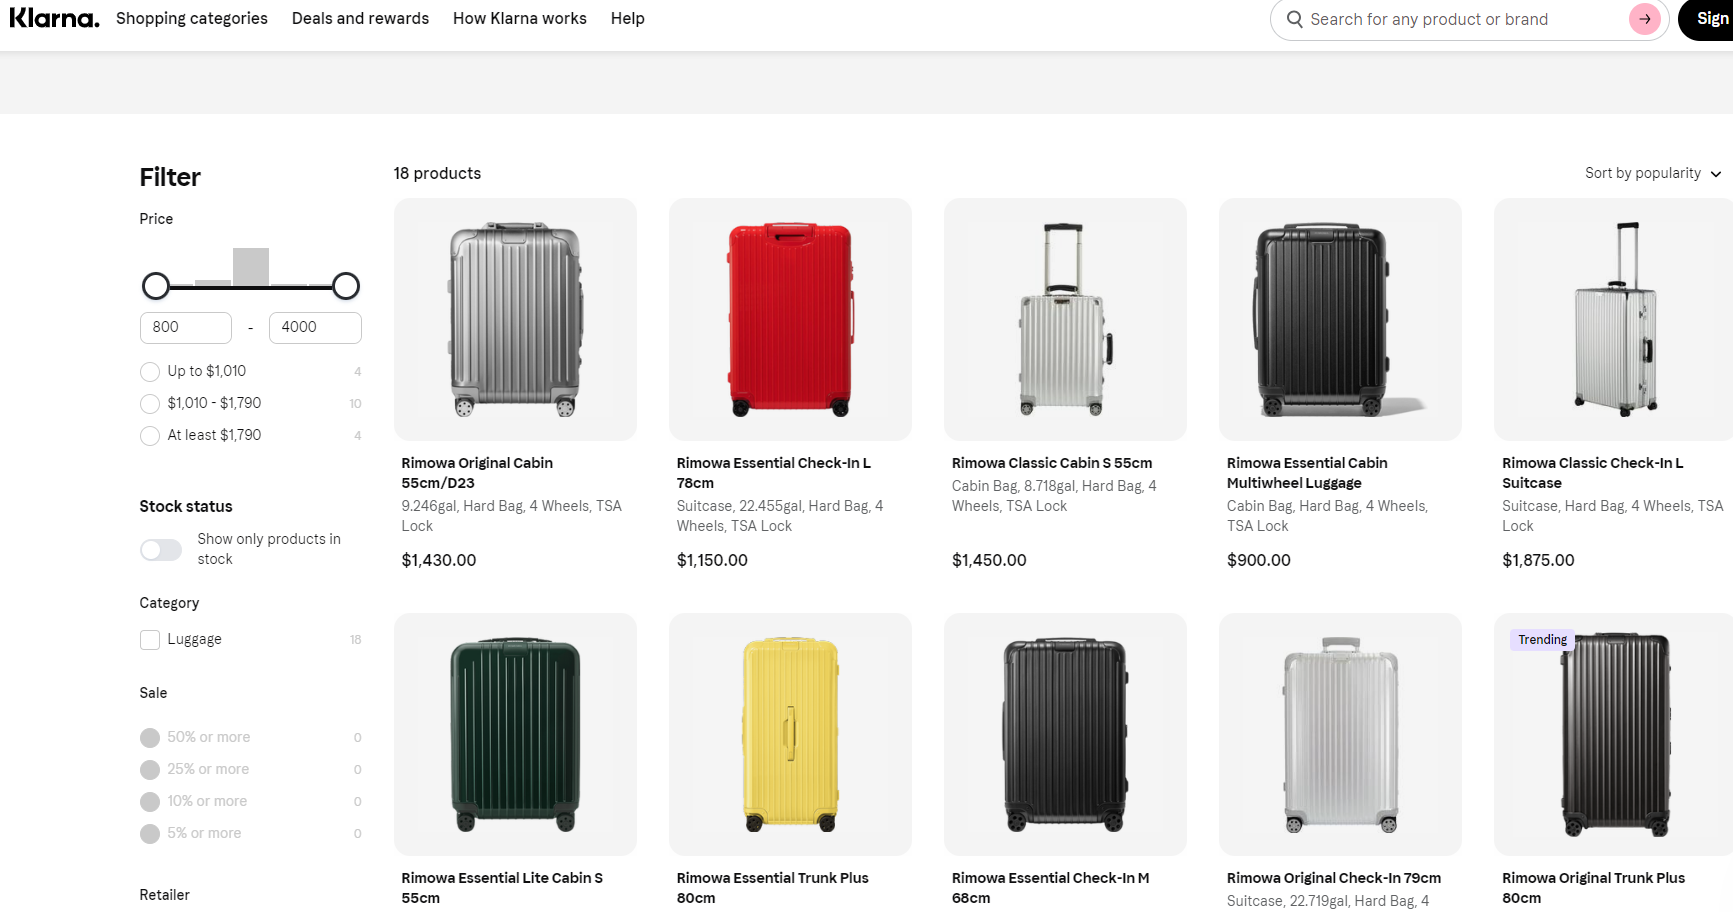 Where To Buy Rimowa The Cheapest In 2023? (Cheapest Country